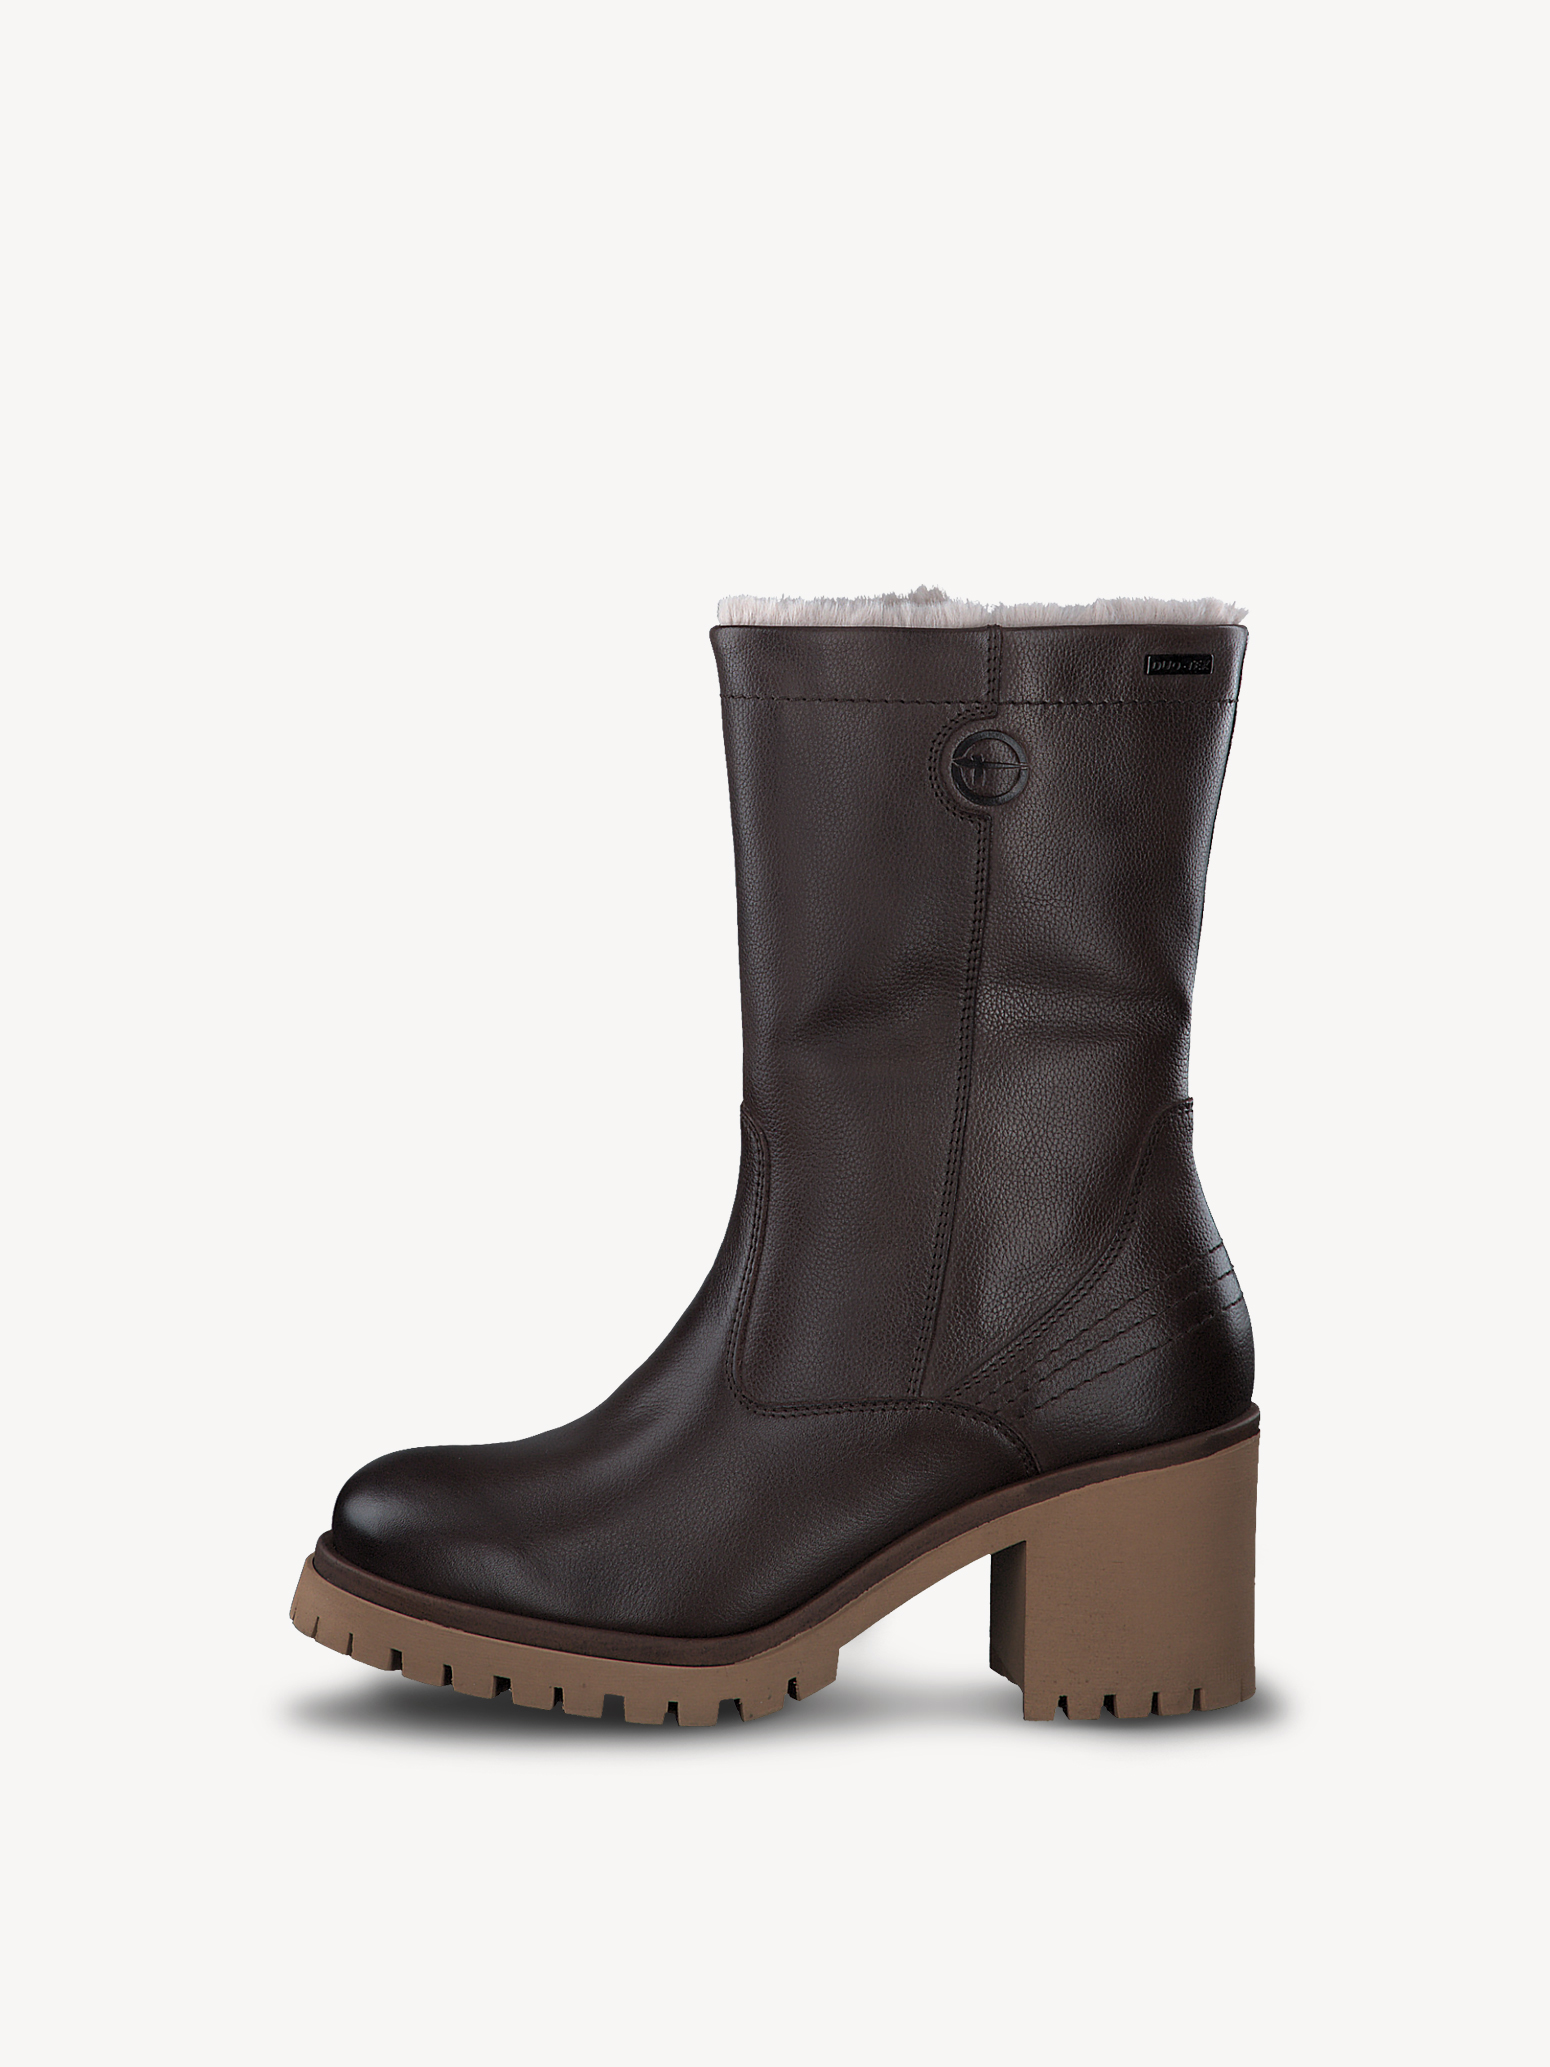 Leather Bootie - brown warm lining